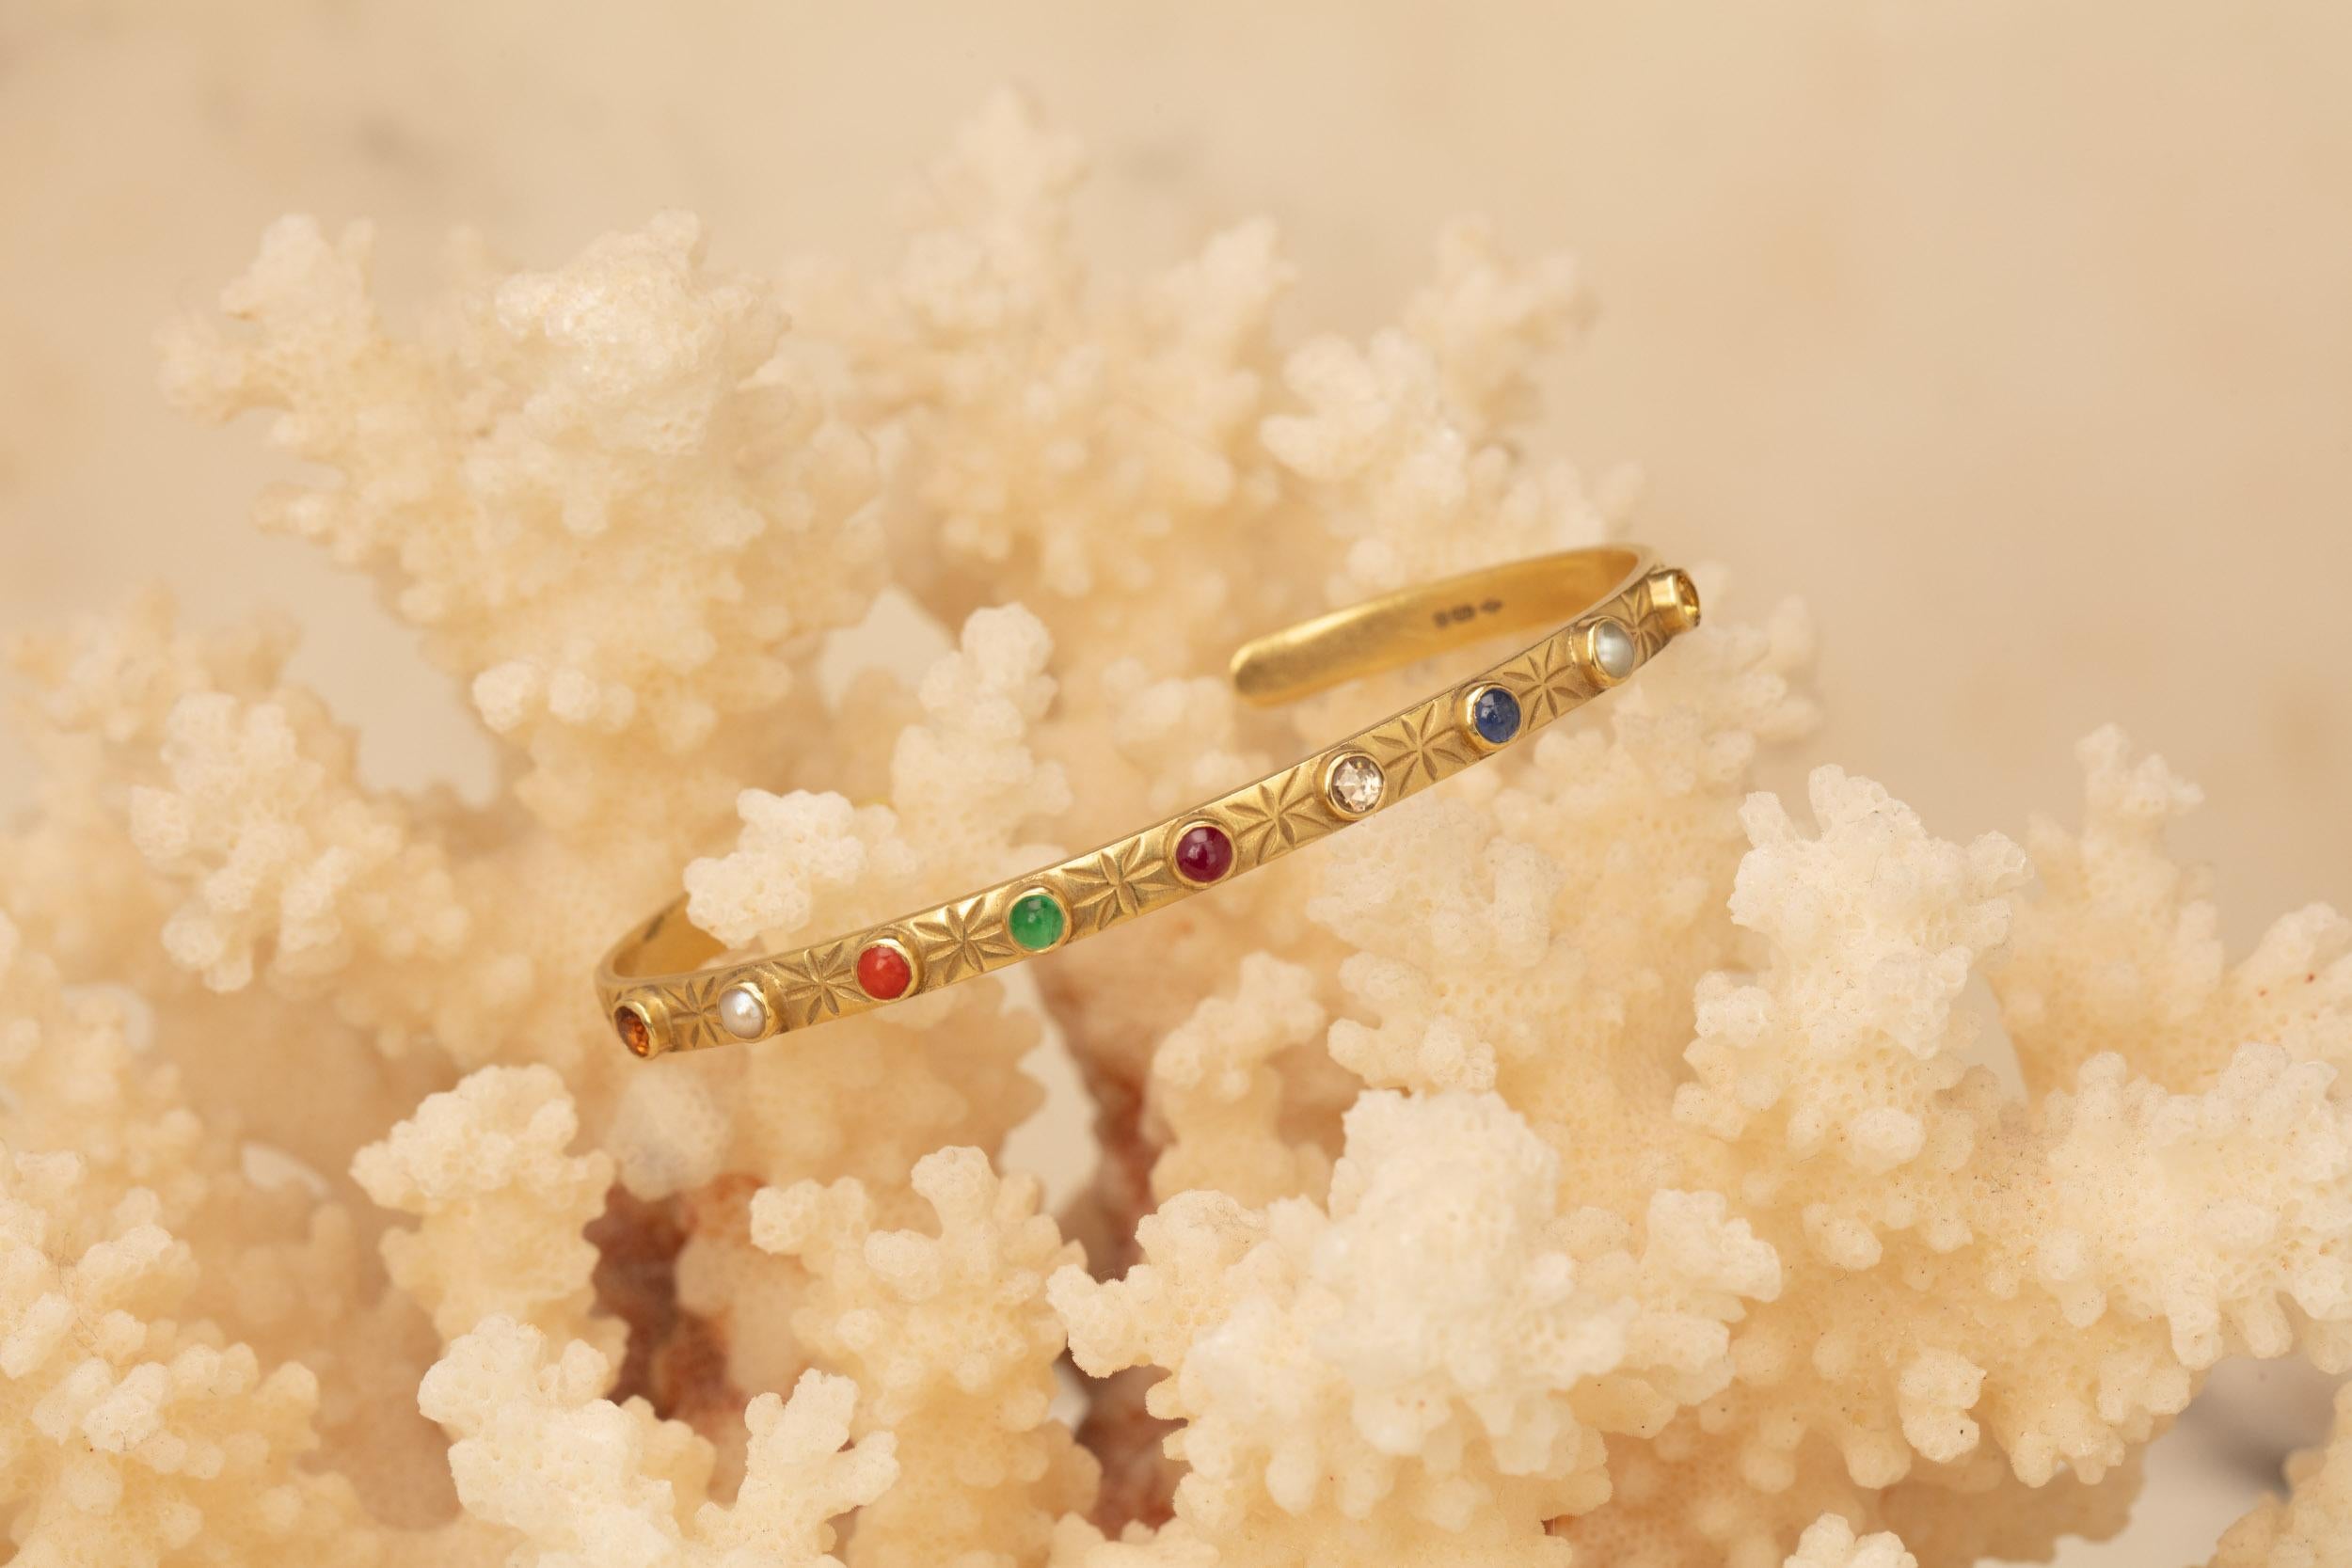 This piece holds nine cabochon gems set in an 18 karat gold cuff with engravings of stars and moons along the outer surface. The inner surface of the bangle is engraved with 